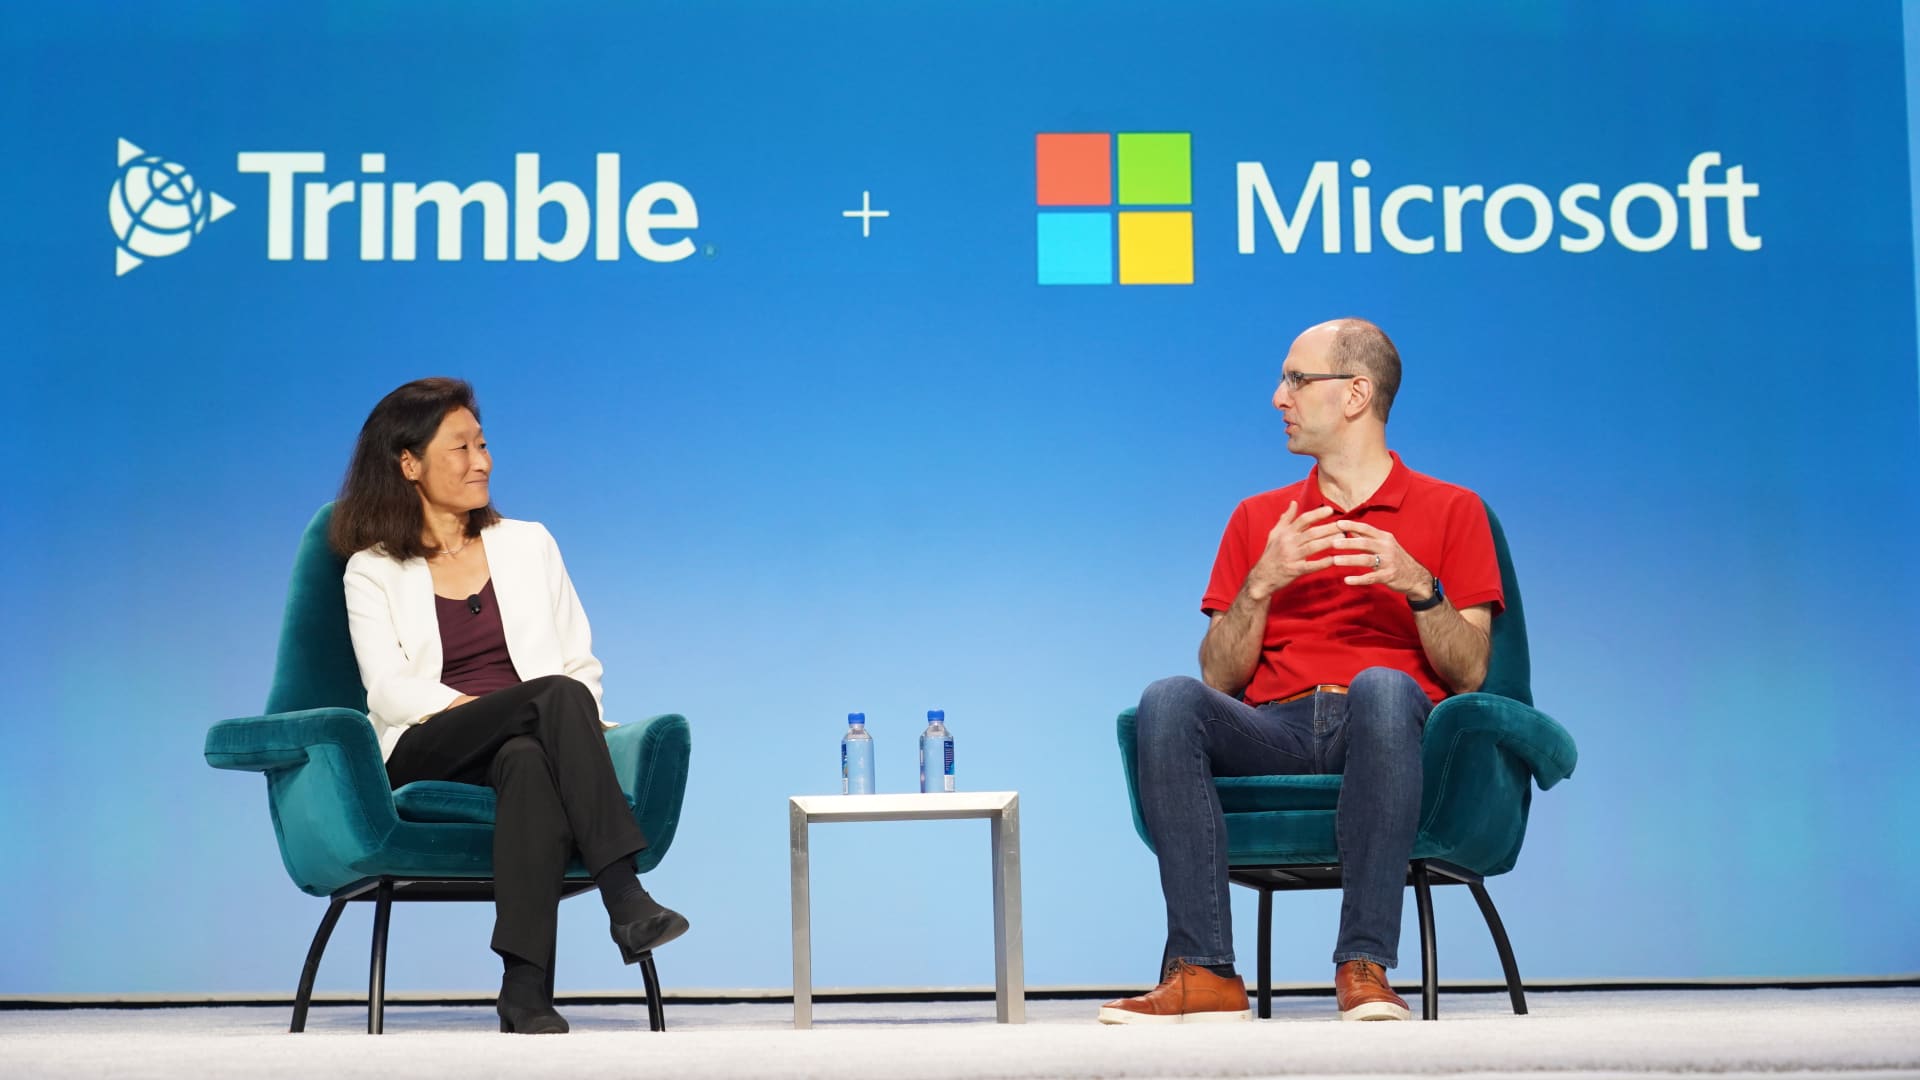 Microsoft GitHub relying more on Azure cloud services: Scott Guthrie